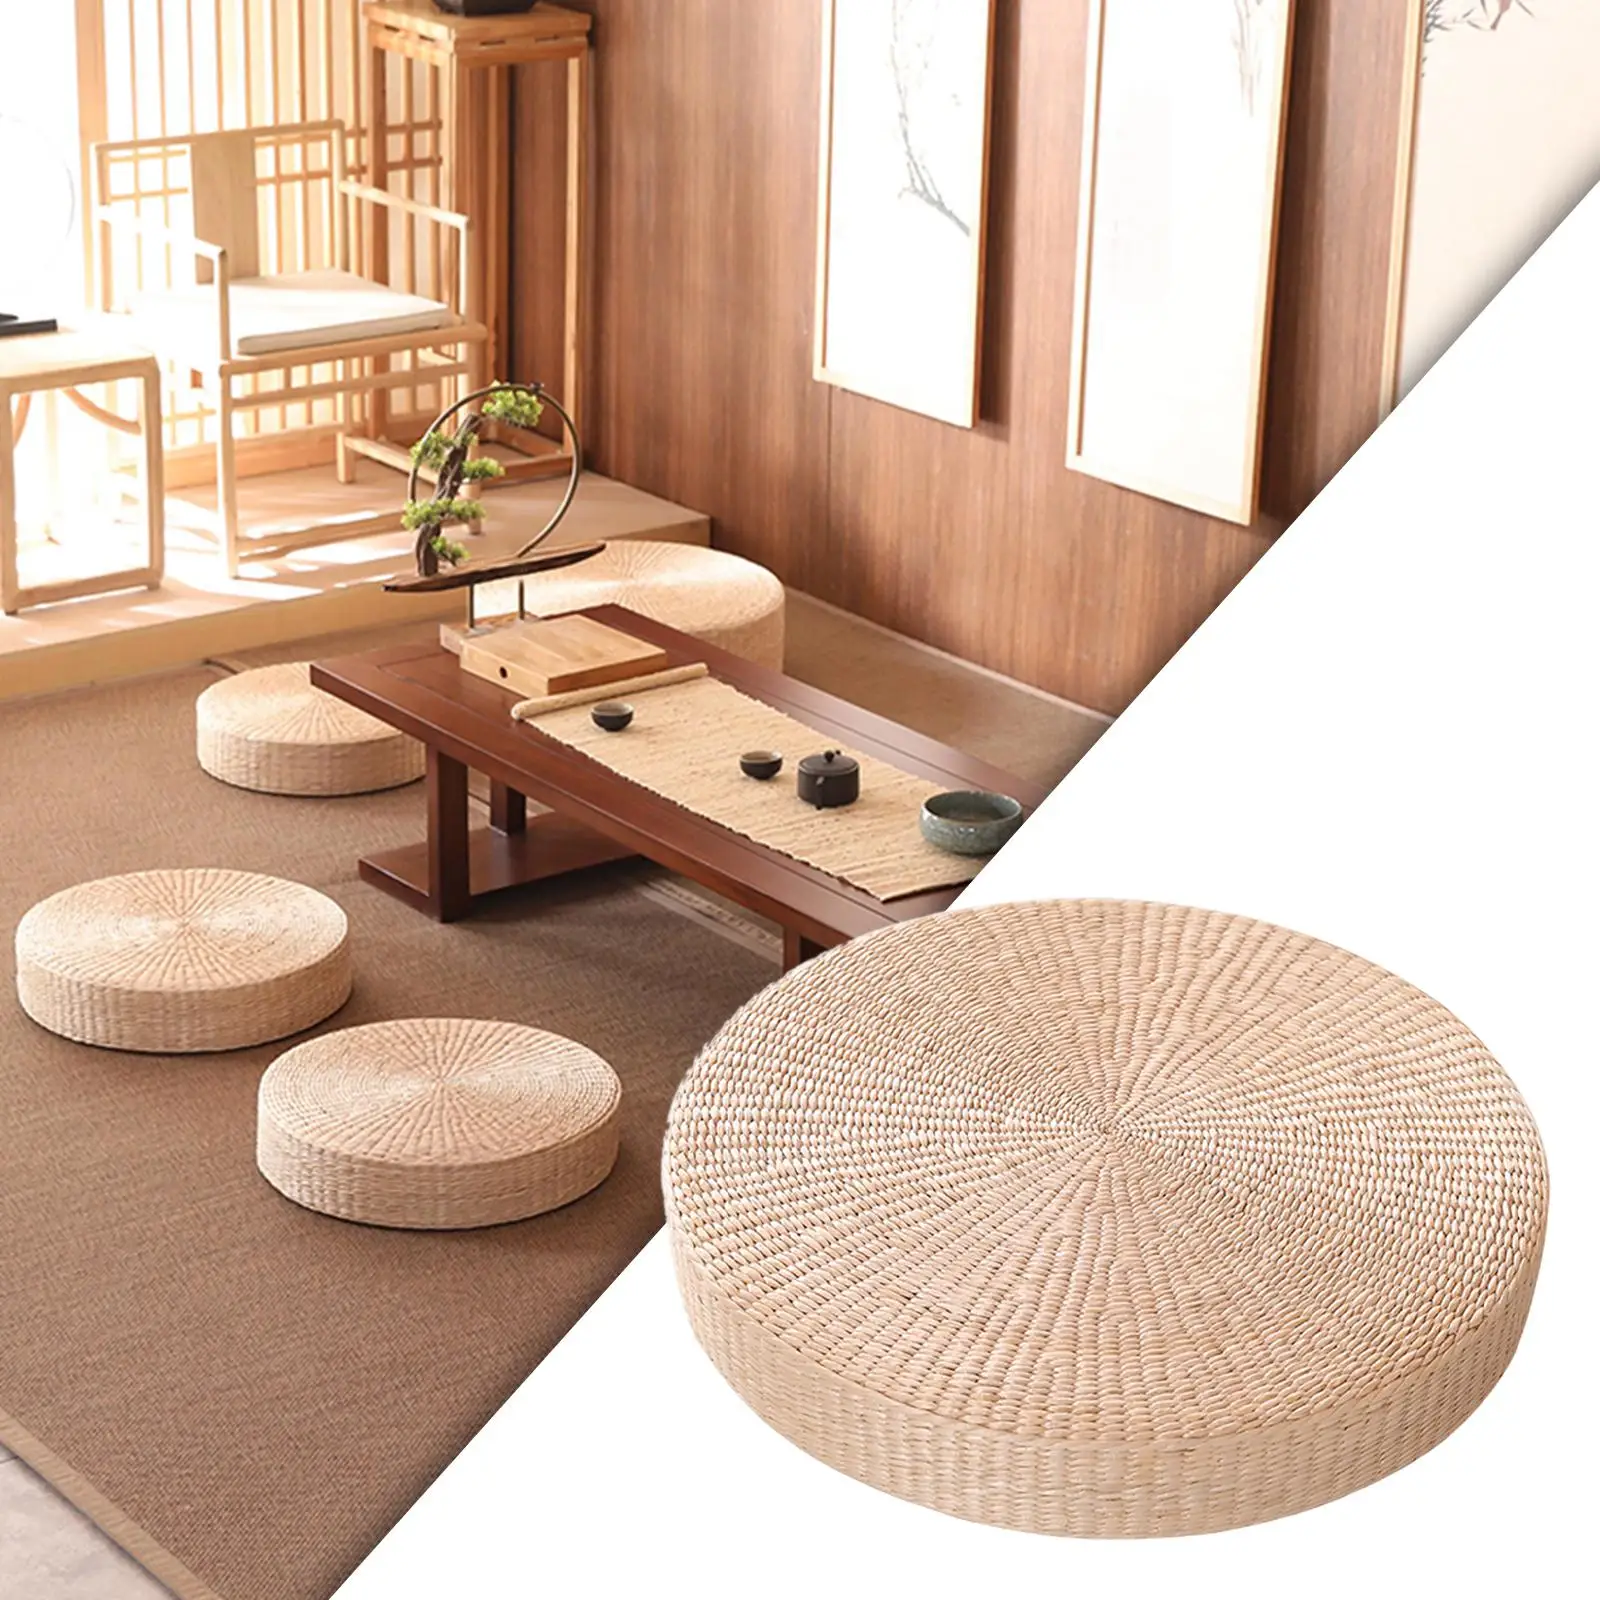 Round Tatami Seat Cushion Pouf Tatami Cushion Floor Pillow Pouf Knitted Tatami Cushion for Garden Dining Room Decoration